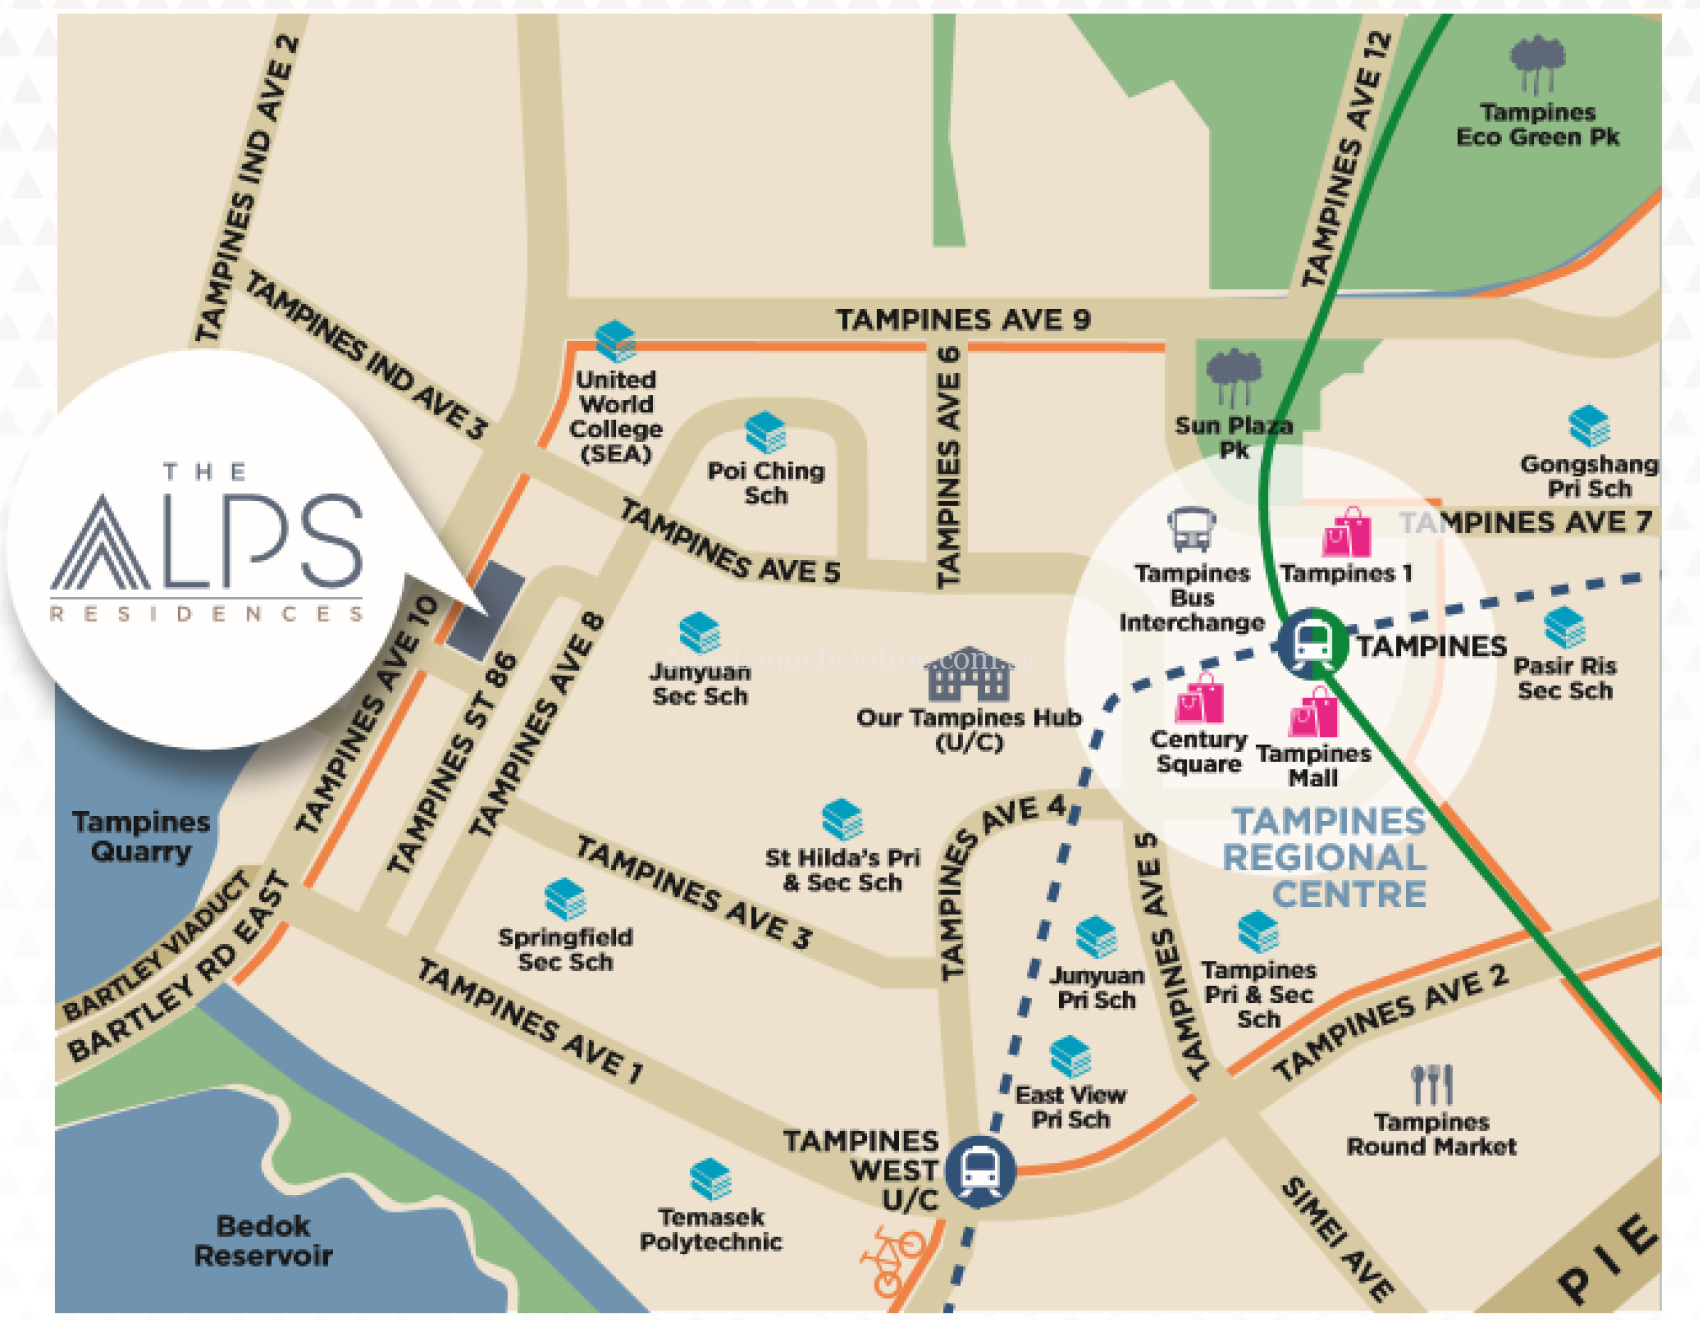 The Alps residences location map